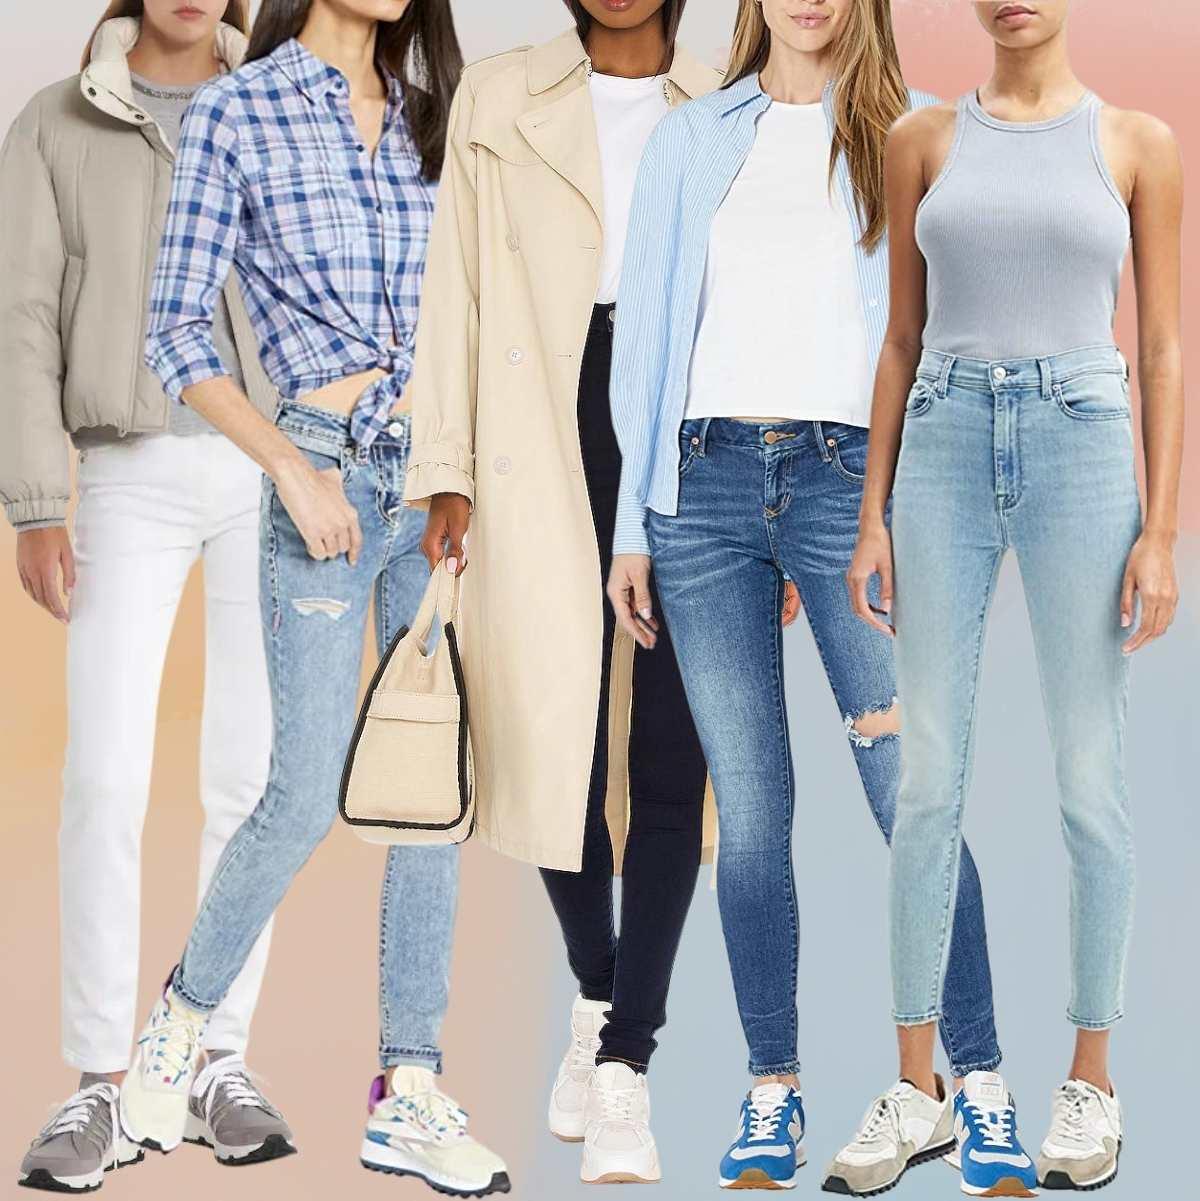 White copy reading the best shoes to wear with skinny jeans over collage of 6 women wearing different skinny jeans outfits.